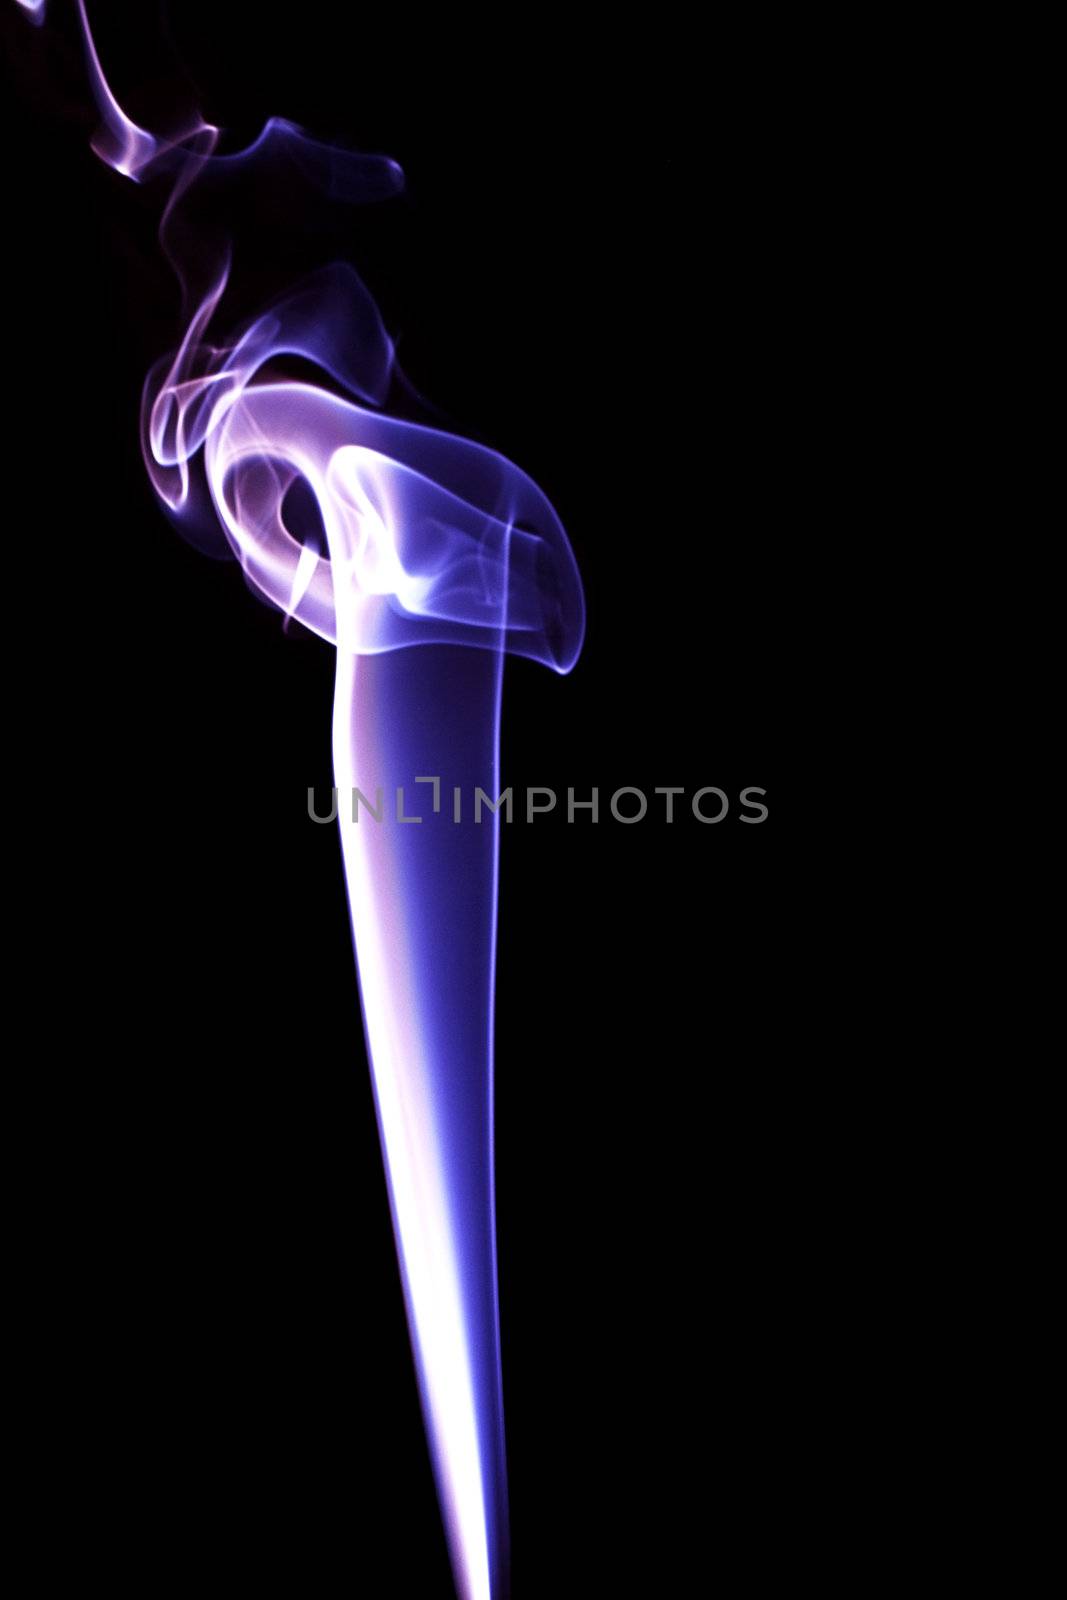 purple abstract and fragile smoke on black background